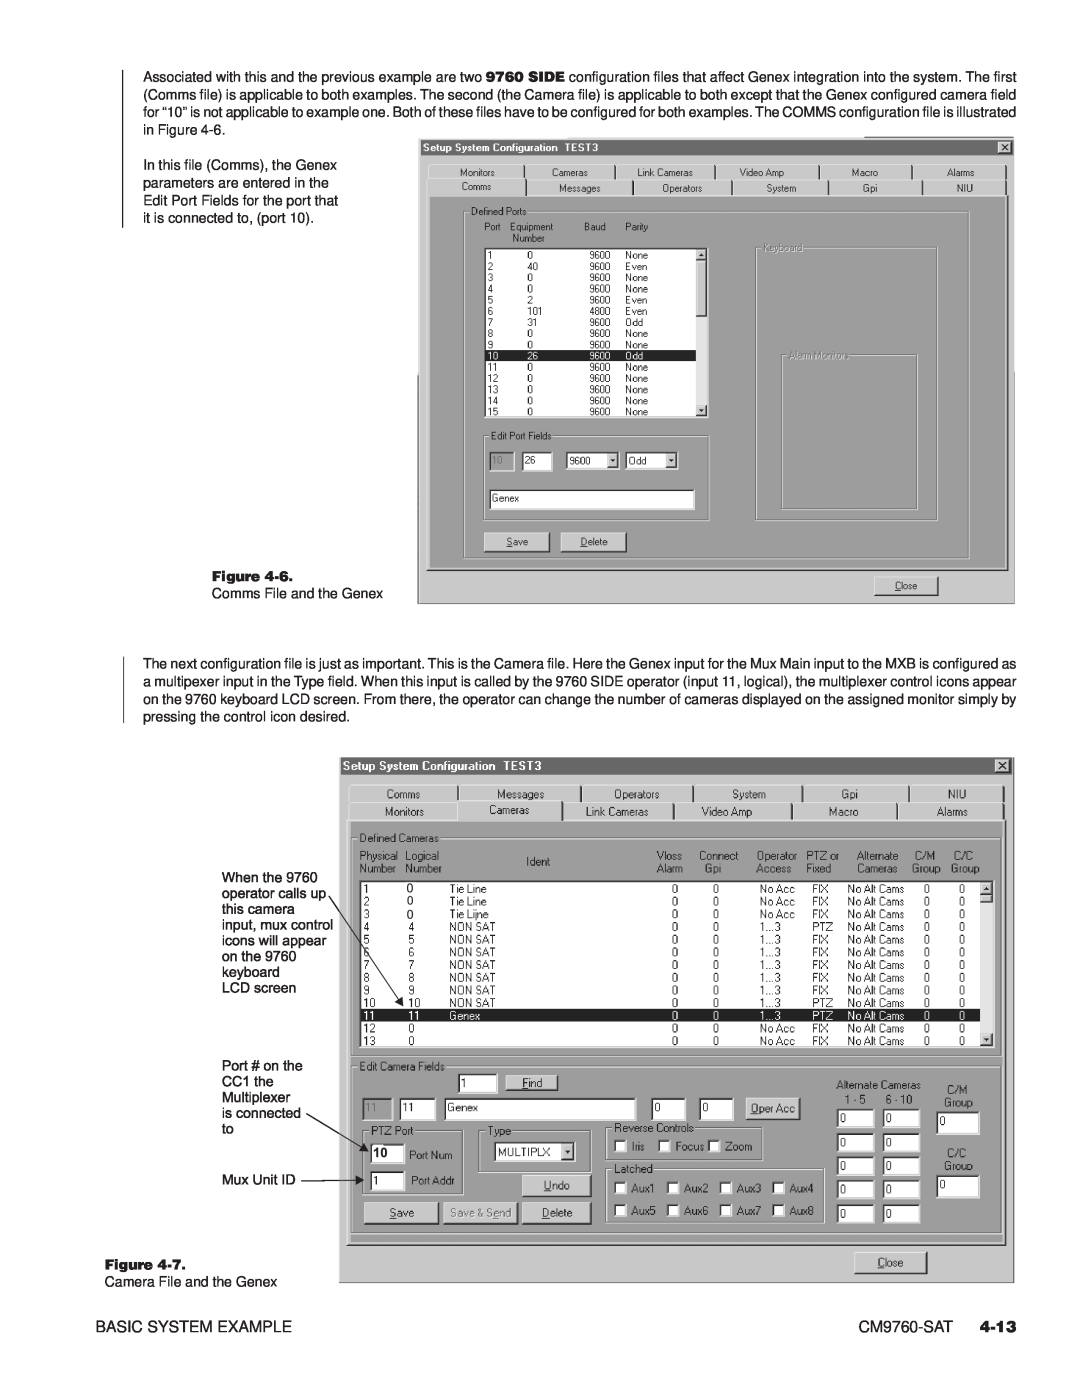 Pelco C573M-D, C1501M, C1503M, C549M-A, C542M-B, C538M manual Basic System Example, CM9760-SAT, Figure, Comms File and the Genex 